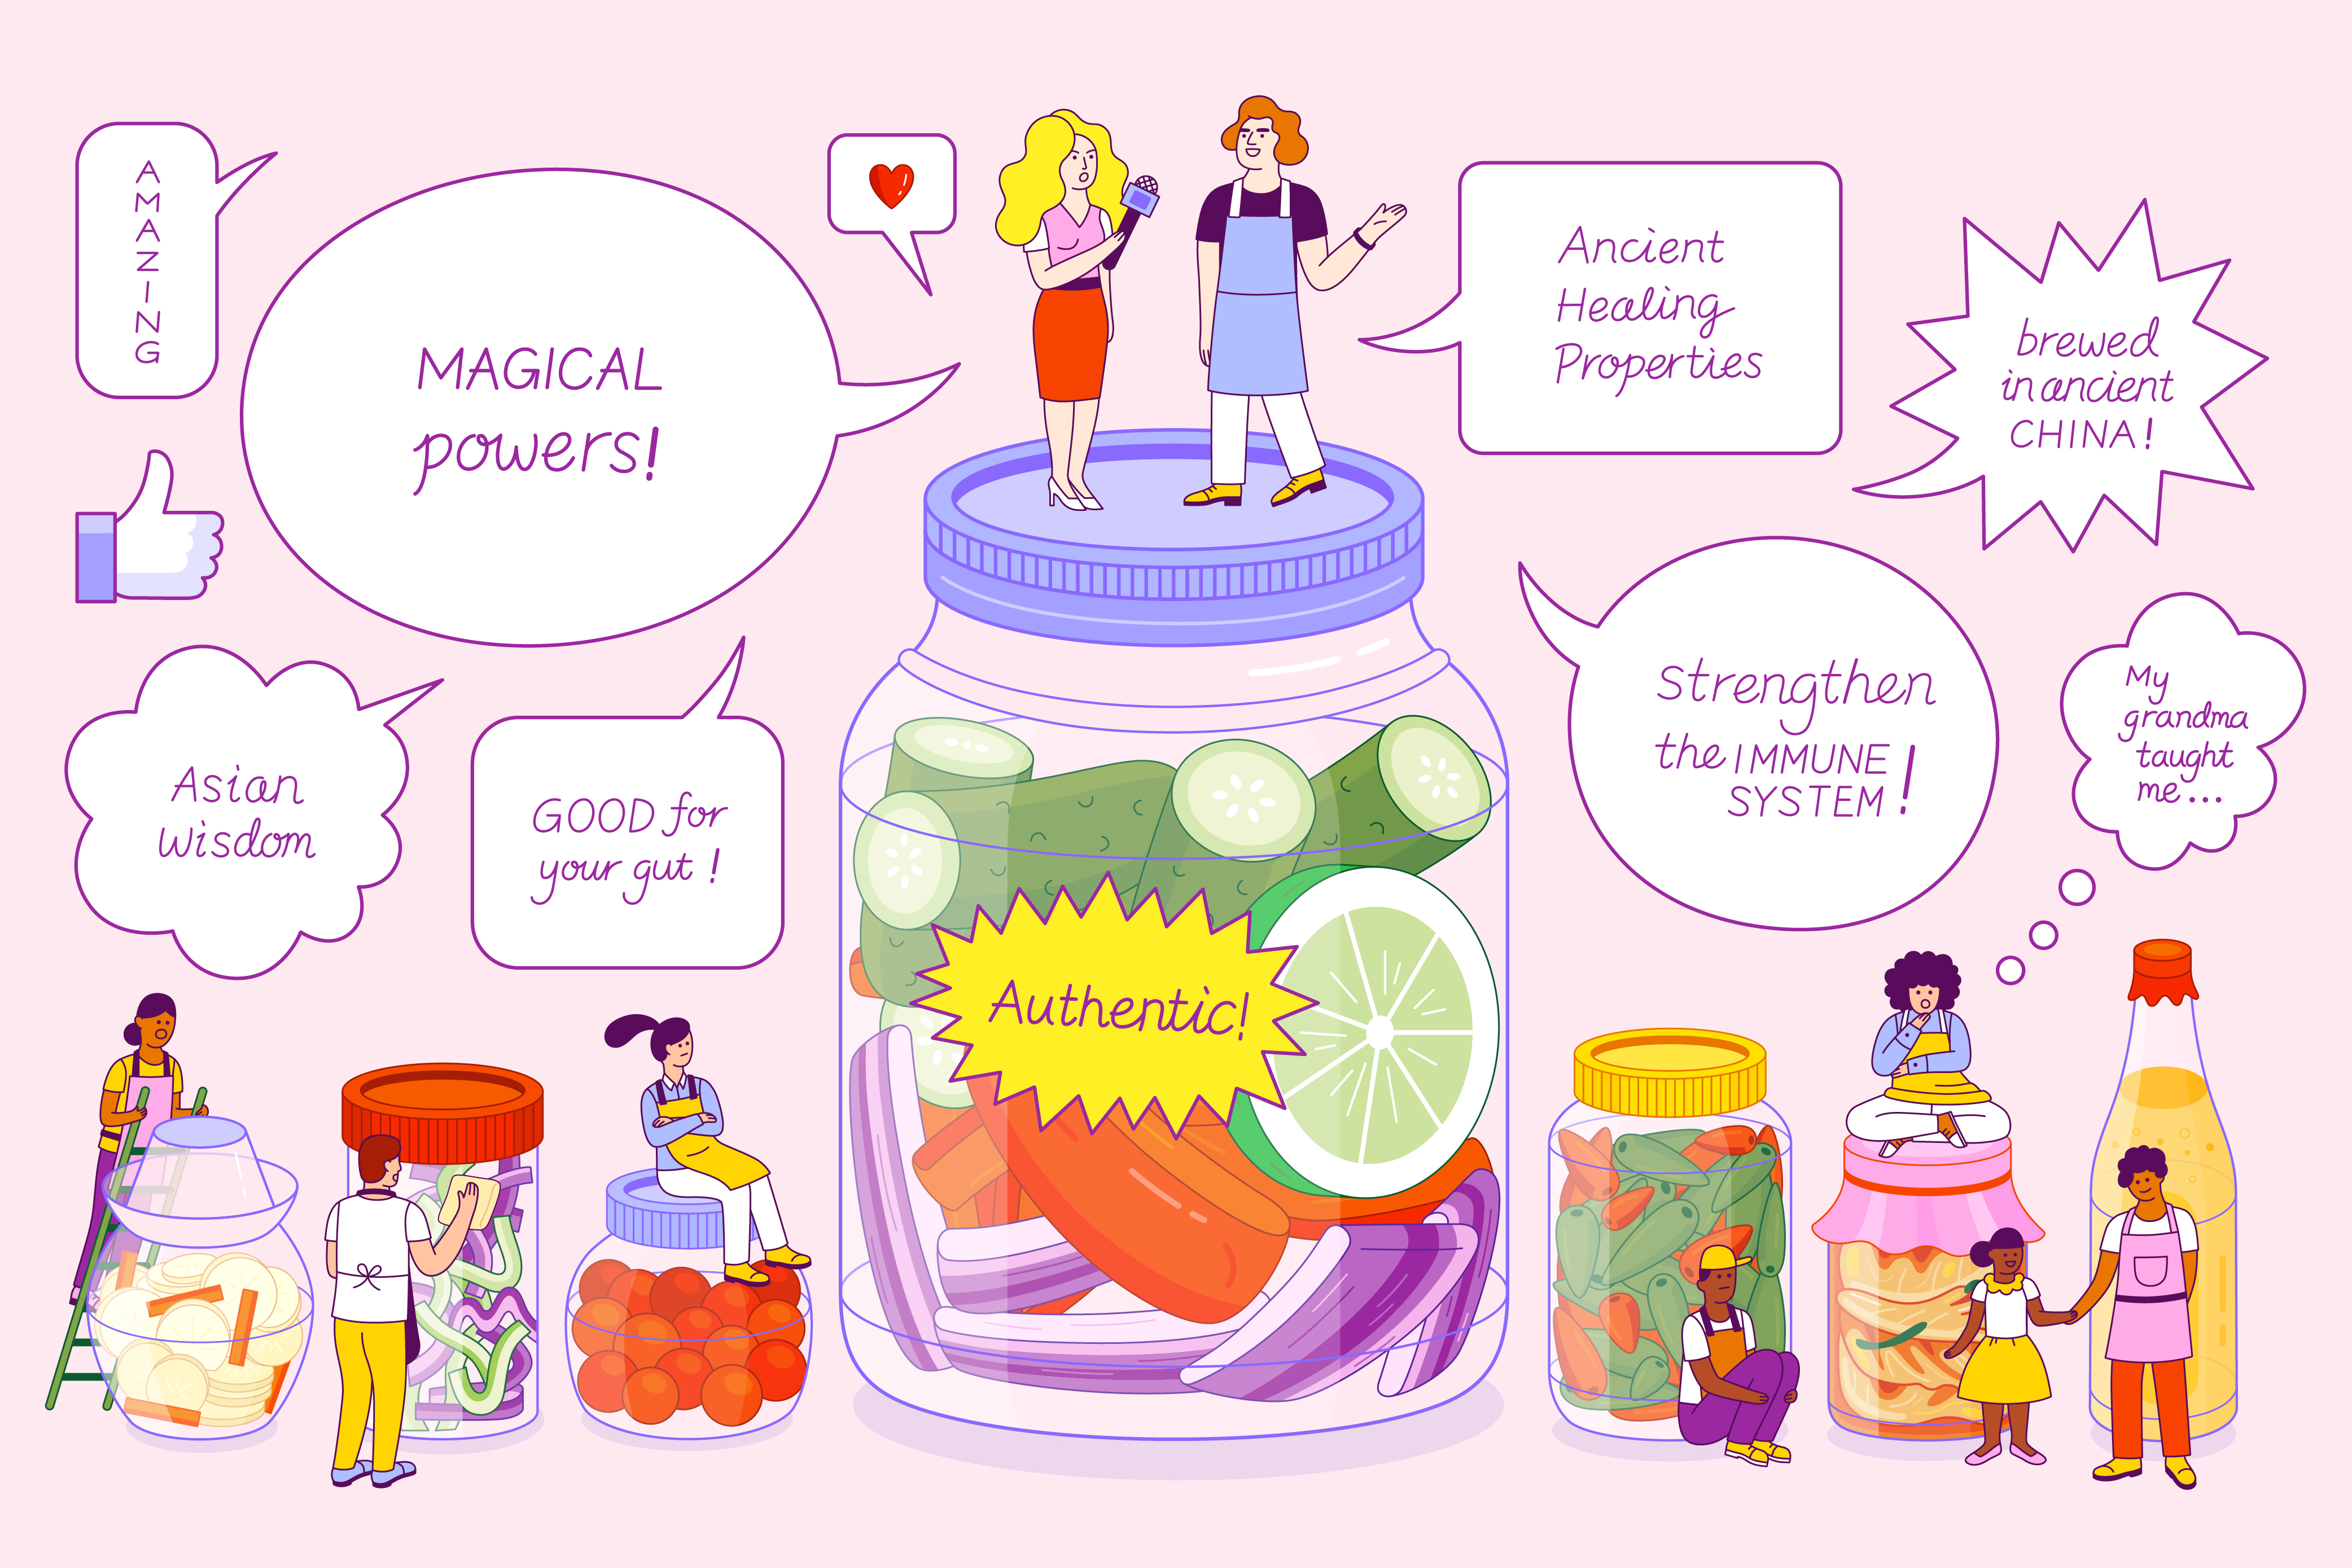 Jars of fermented foods with two white people standing on top of the largest one and people of color on top of or near the smaller ones. Thought and voice bubbles with claims like “magical powers,” “strengthens the immune system,” and “ancient healing properties” hover in the background.